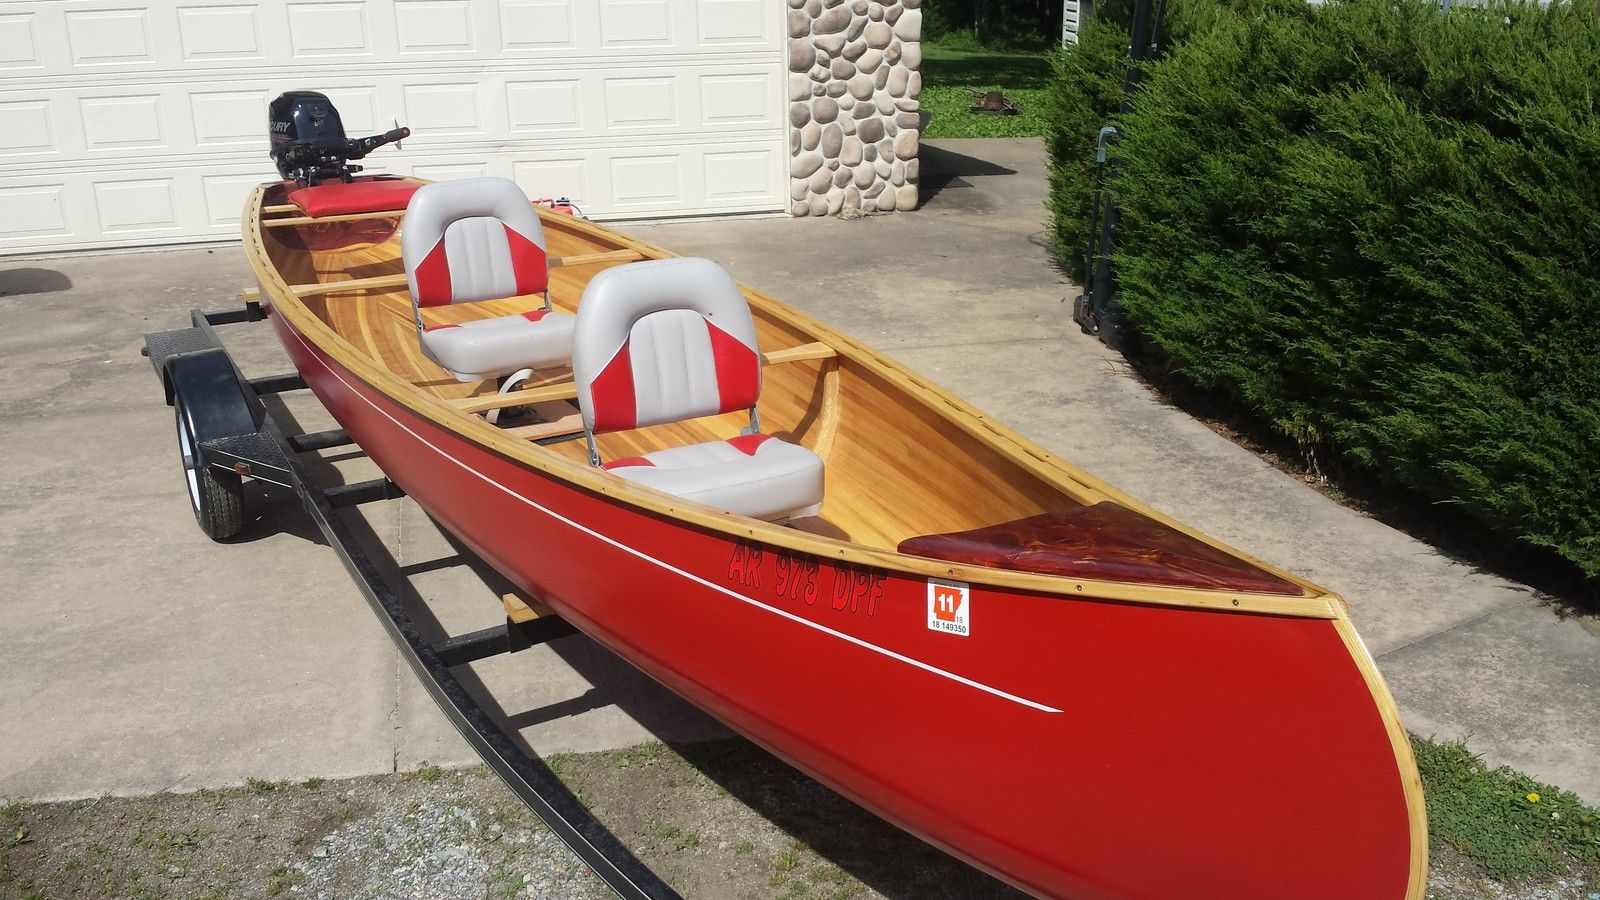 grand laker home built 2016 for sale for $9,500 - boats